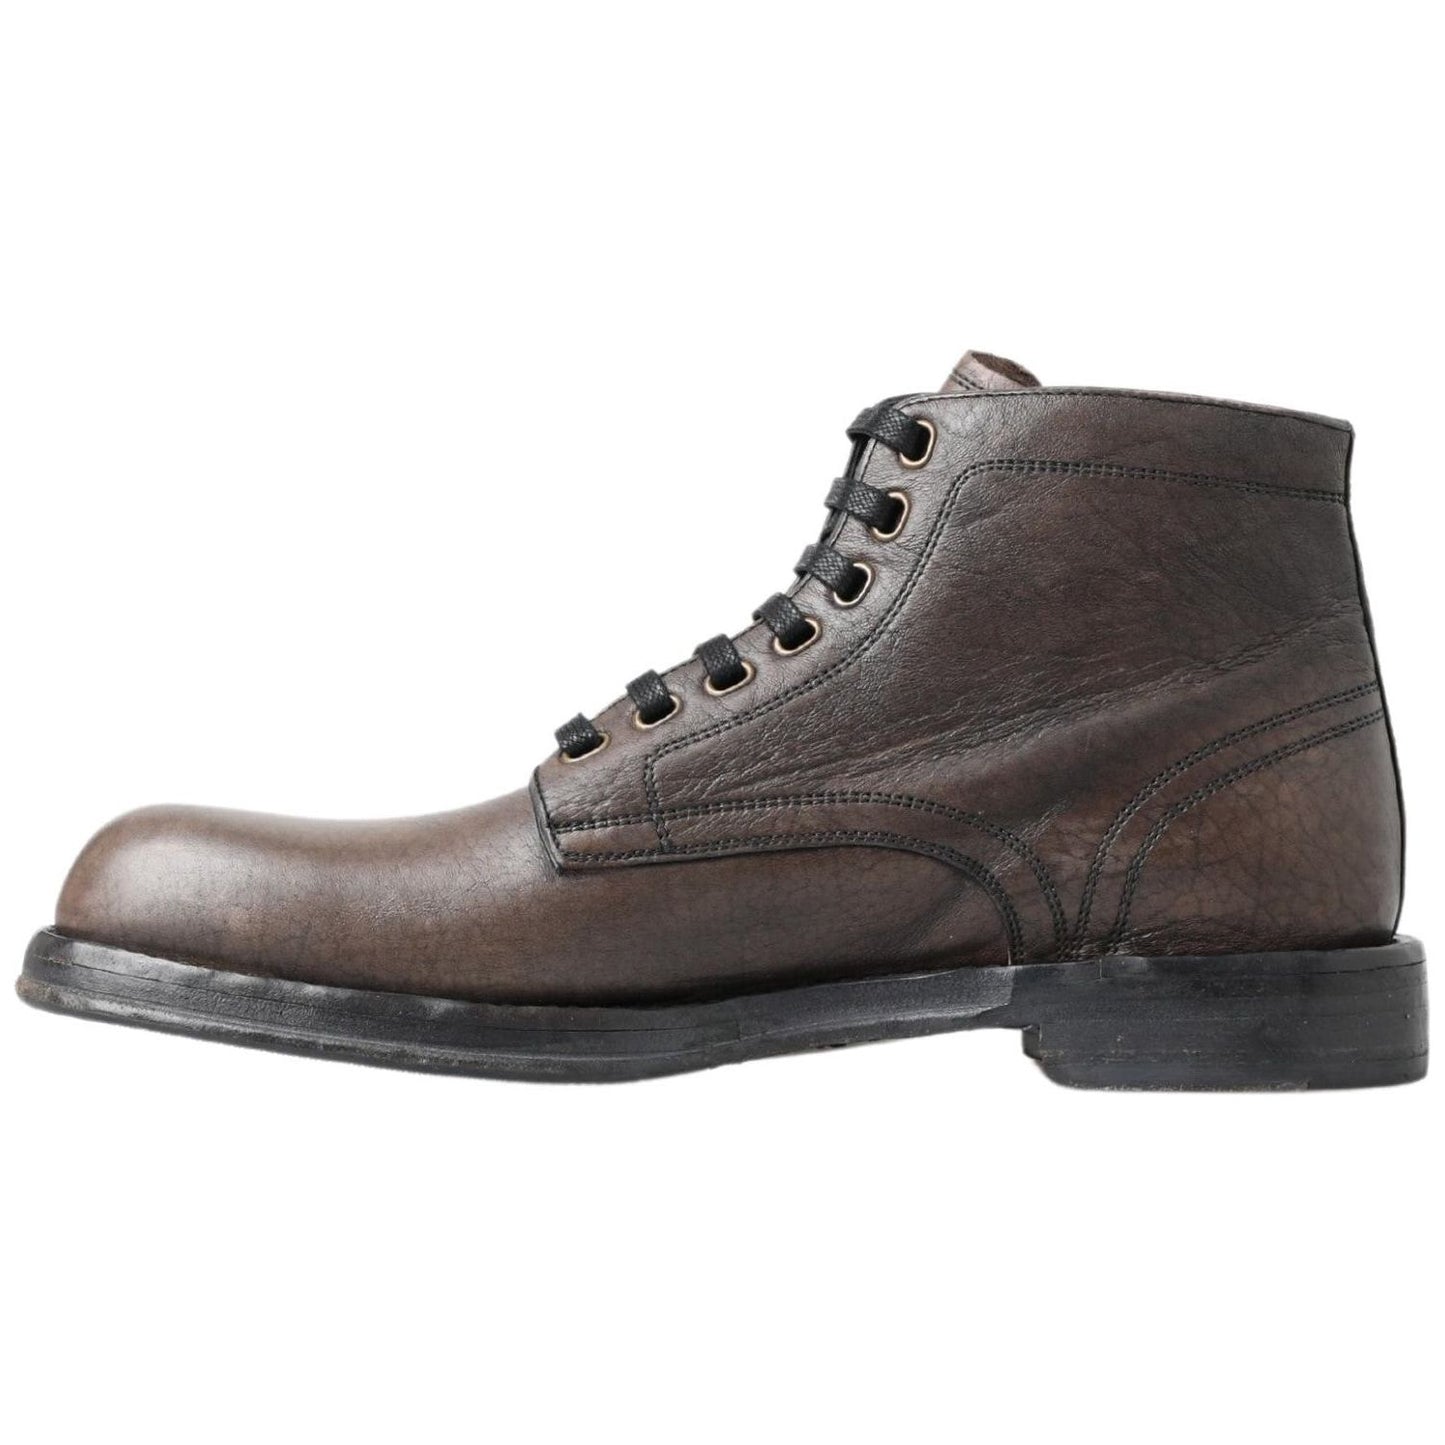 Dolce & Gabbana Elegant Horse Leather Lace-Up Boots brown-horse-leather-perugino-shoes 465A9839-4e804d18-1e3.jpg